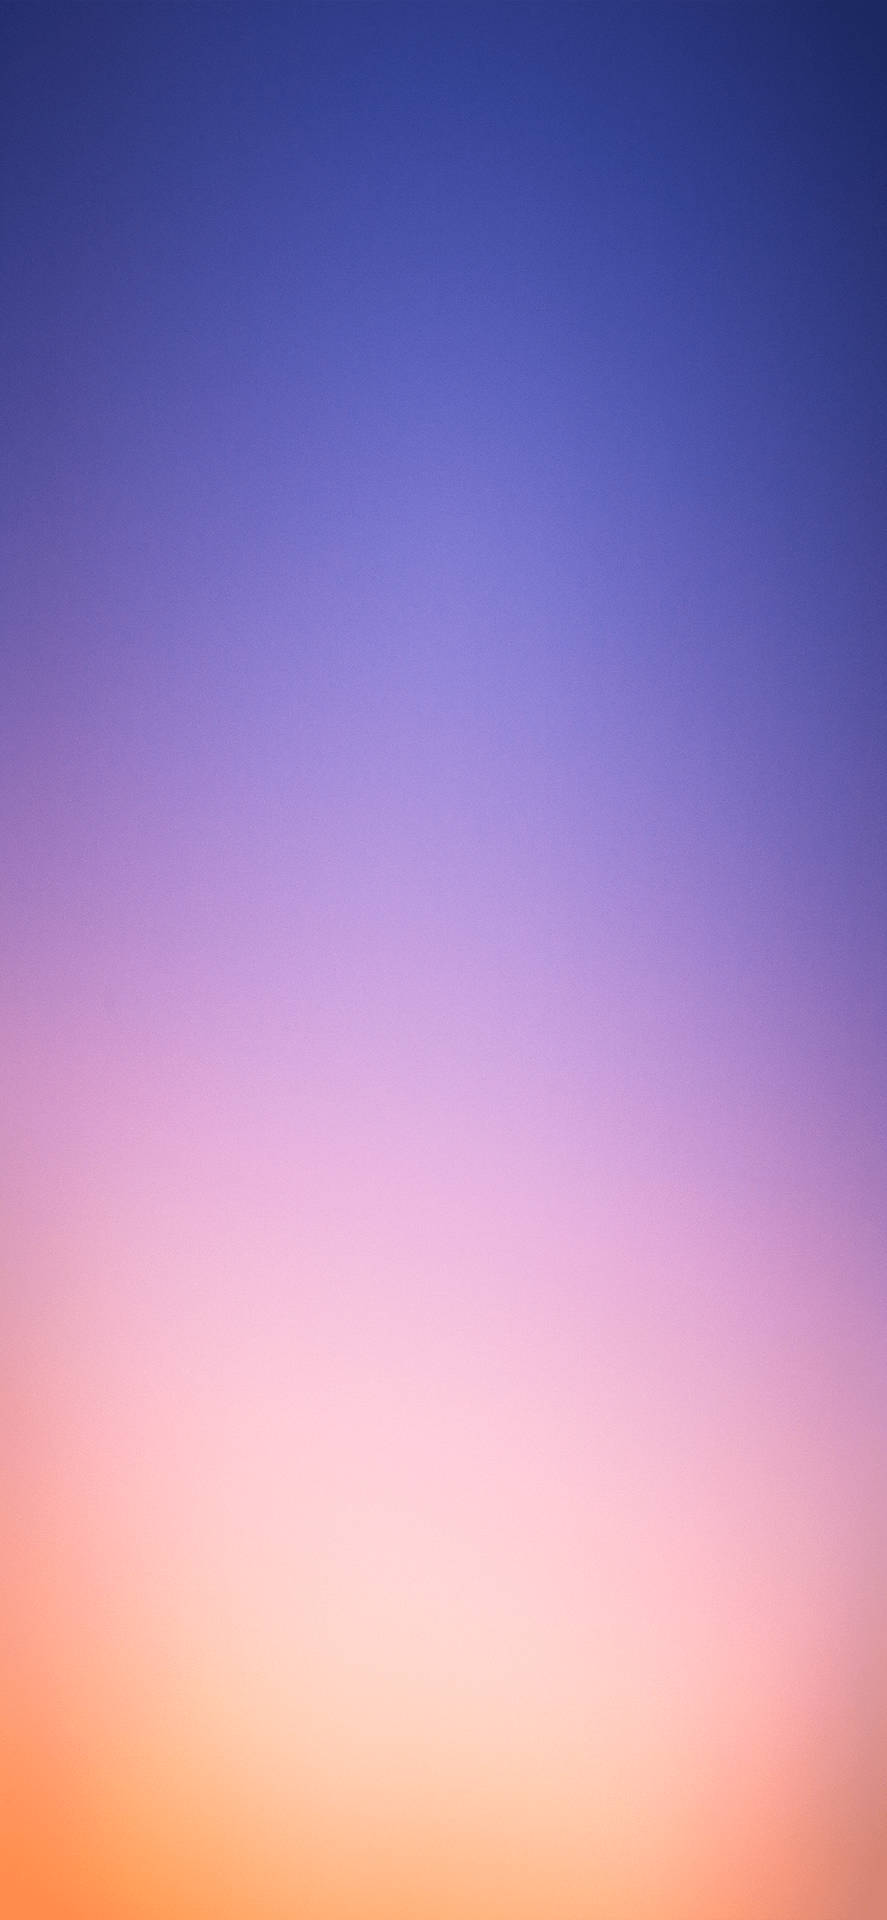 A Sunset With A Blue Sky And A Pink Sky Background